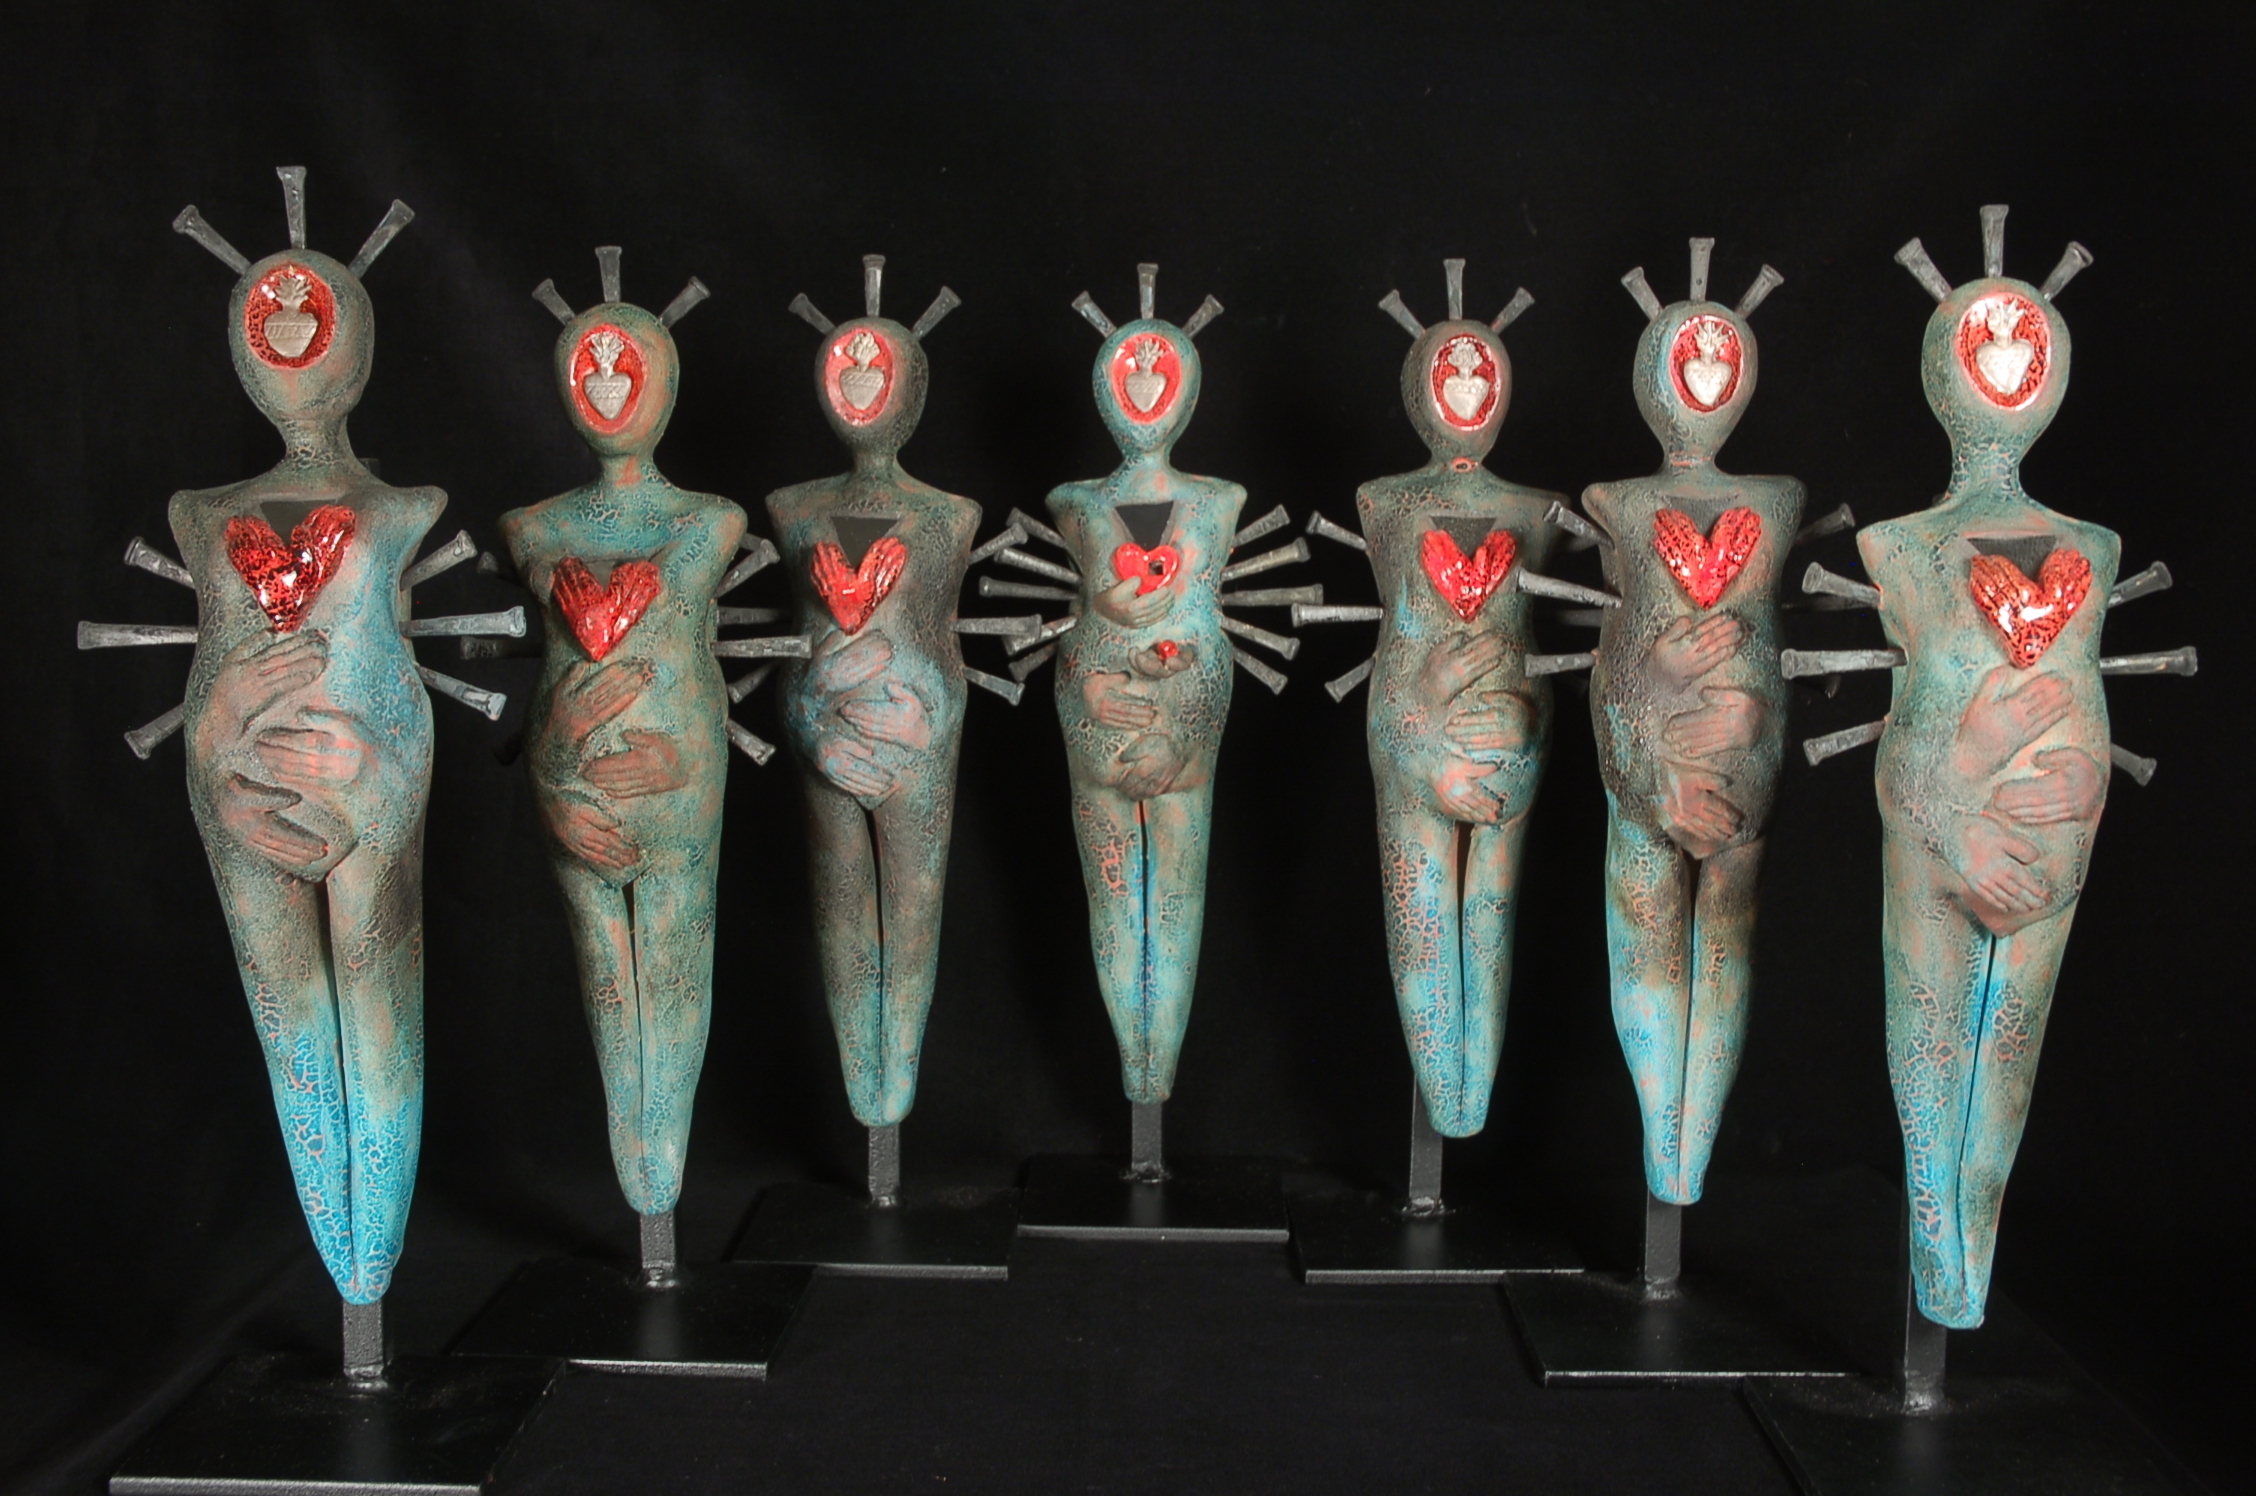 Seven female sculptural ceramic figures lined up. Hands are caressing the belly and torso areas. 